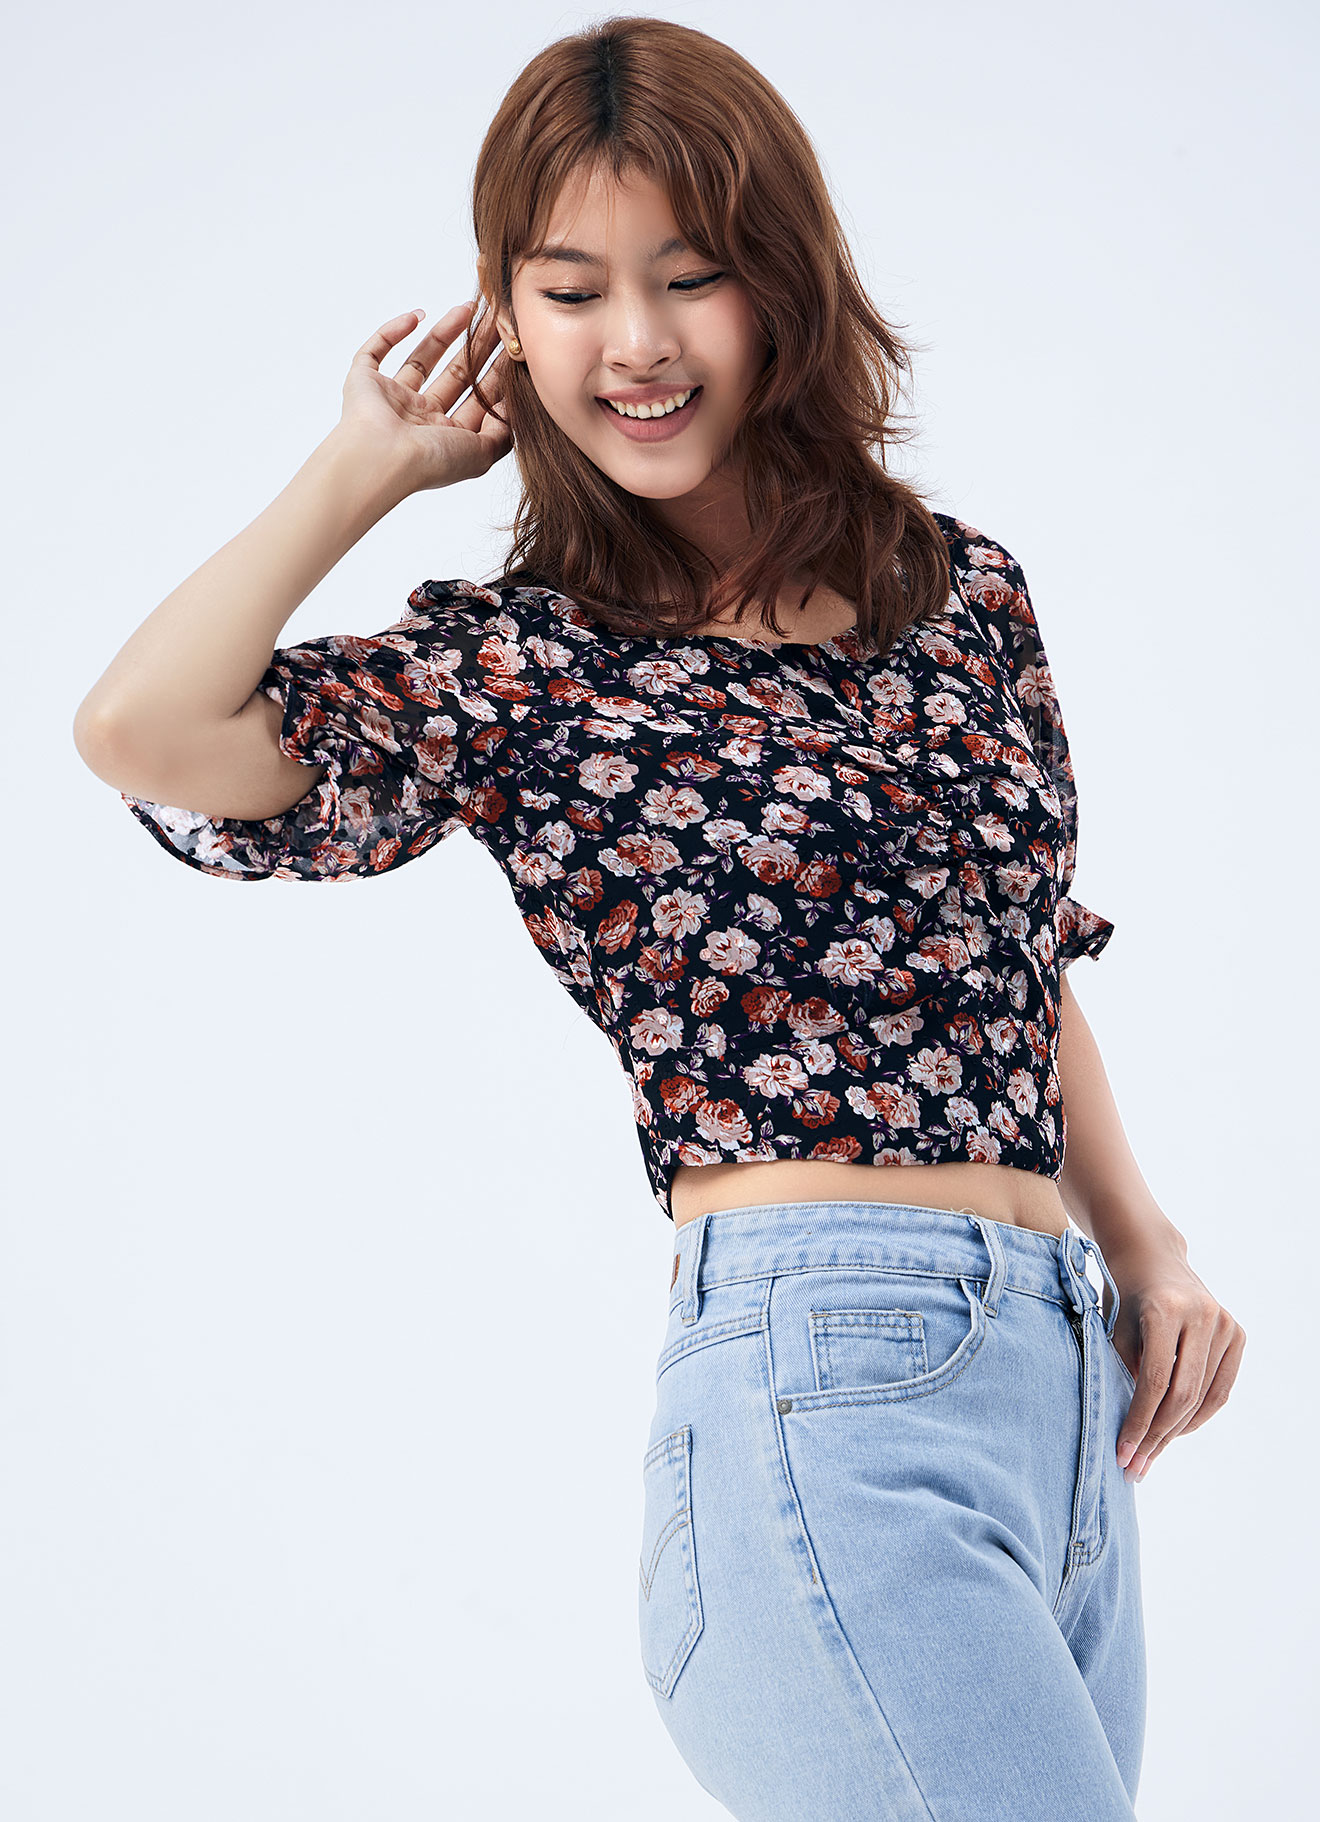 Amber-Brown  by Floral Printed Blouse